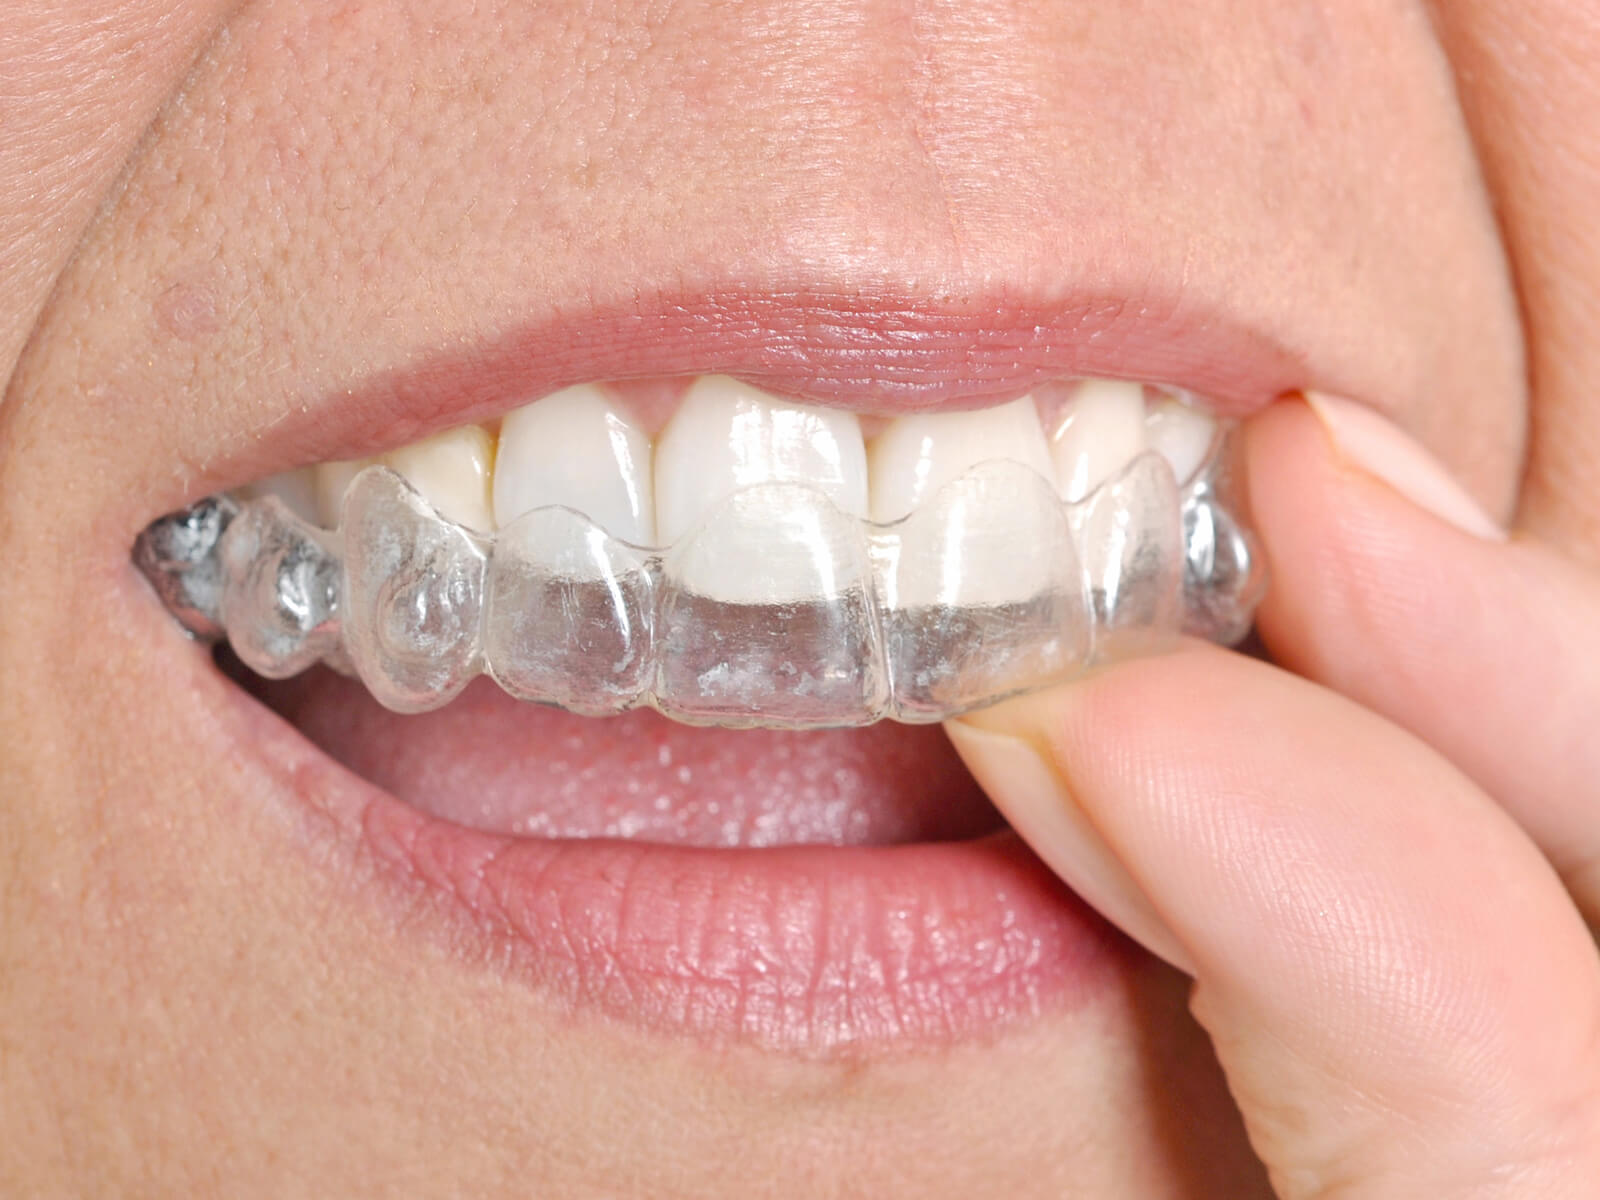 Why is it so hard to remove Invisalign?